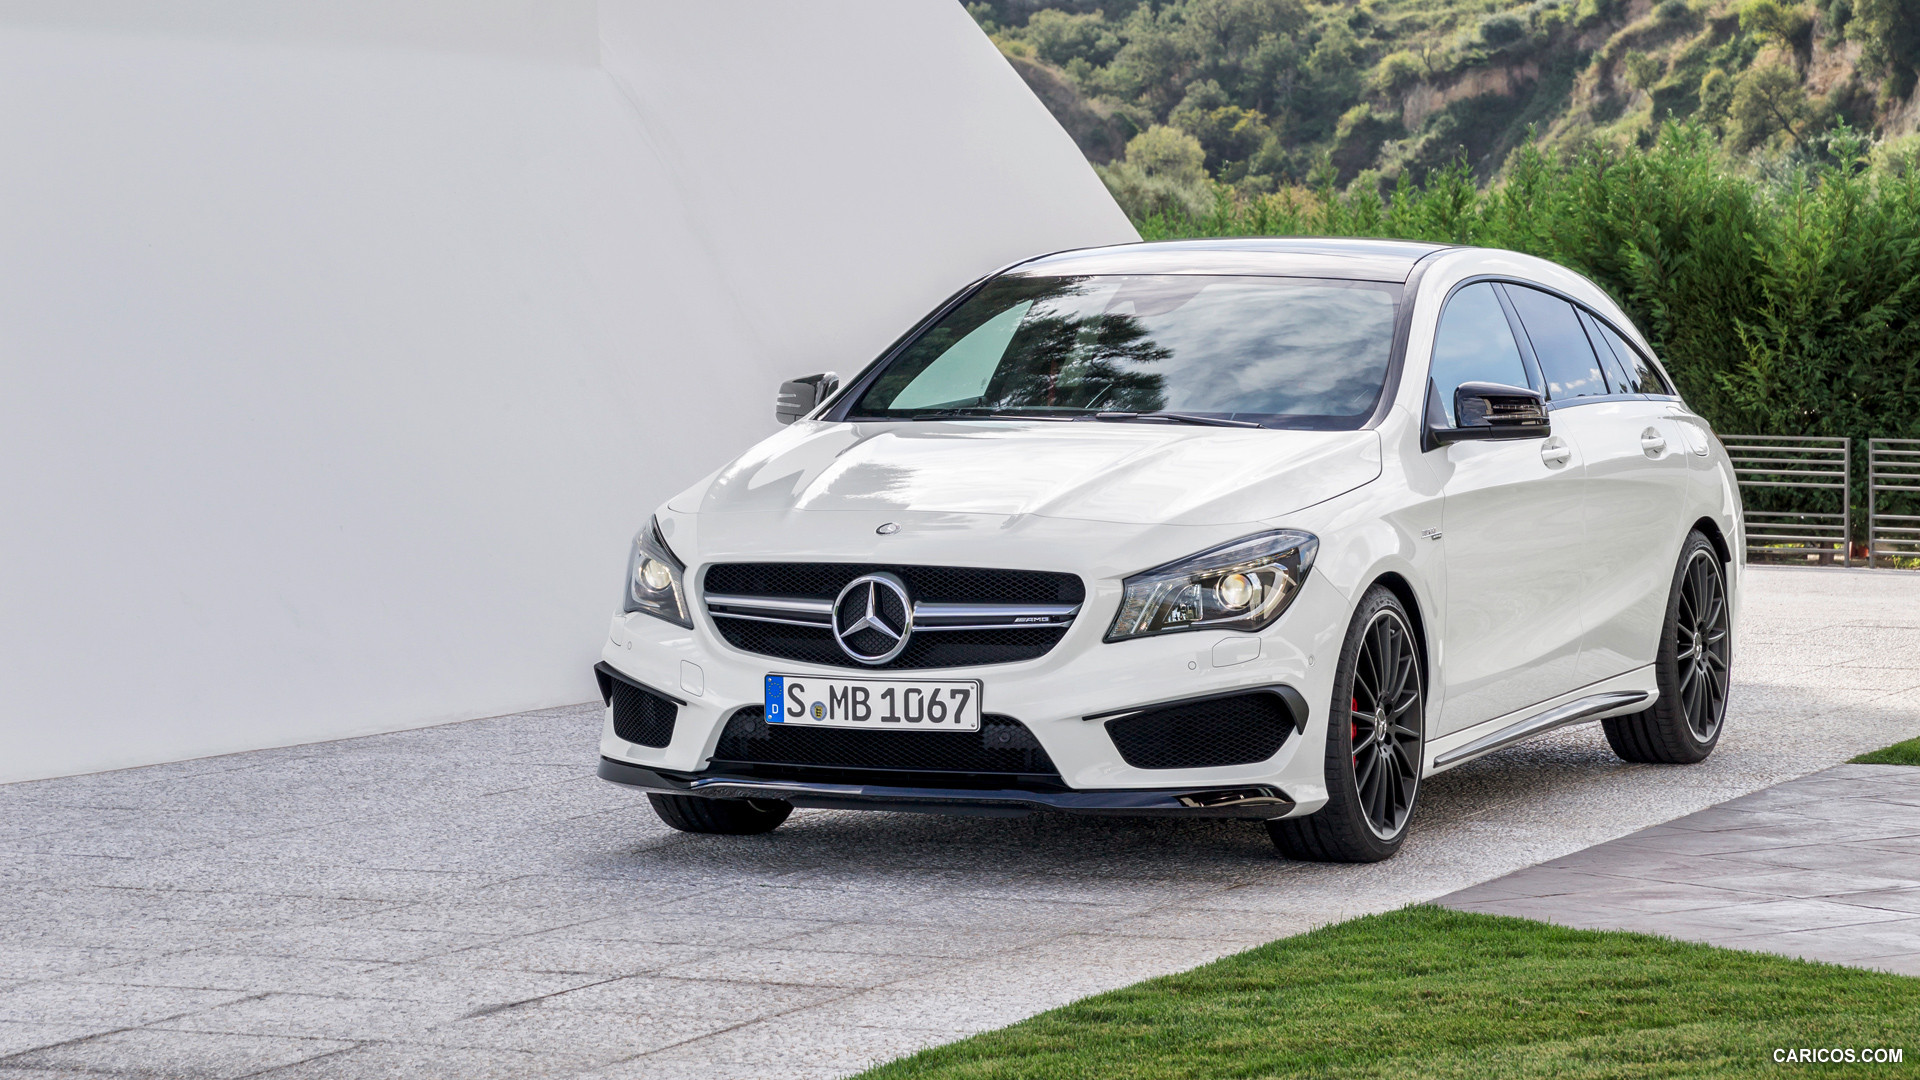 2015 Mercedes-Benz CLA 45 AMG Shooting Brake (Calcite White) - Front, #33 of 70